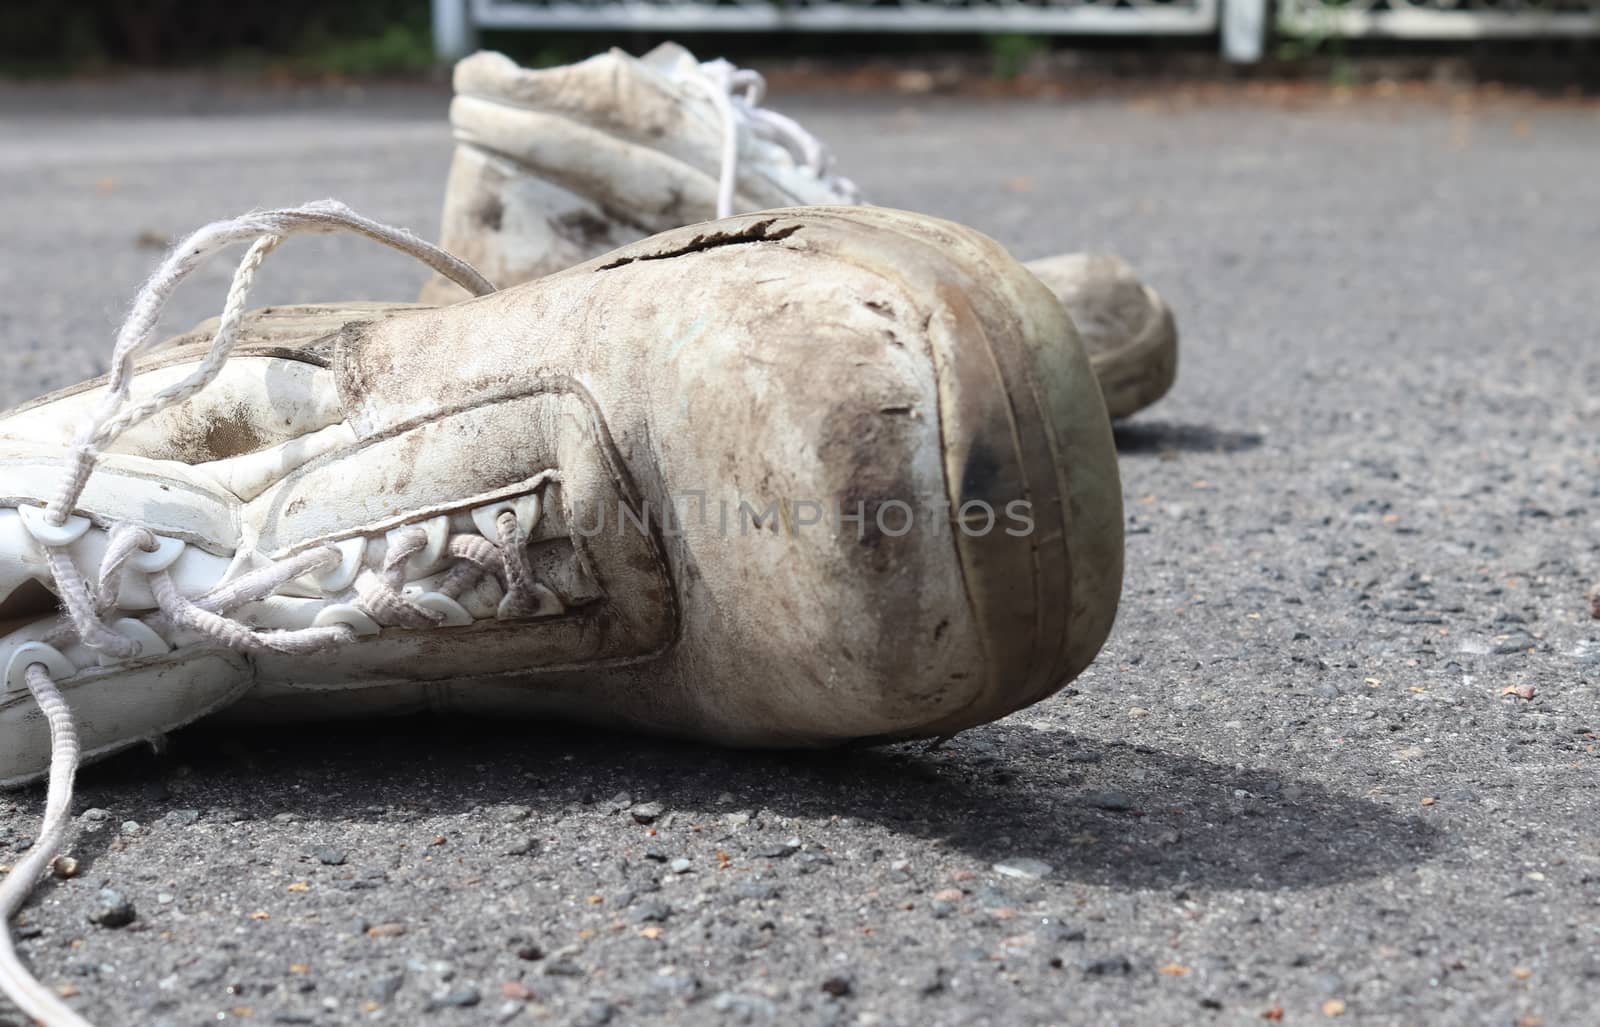 Concept of old shoes left on an ashpalt road with copy space for by MP_foto71